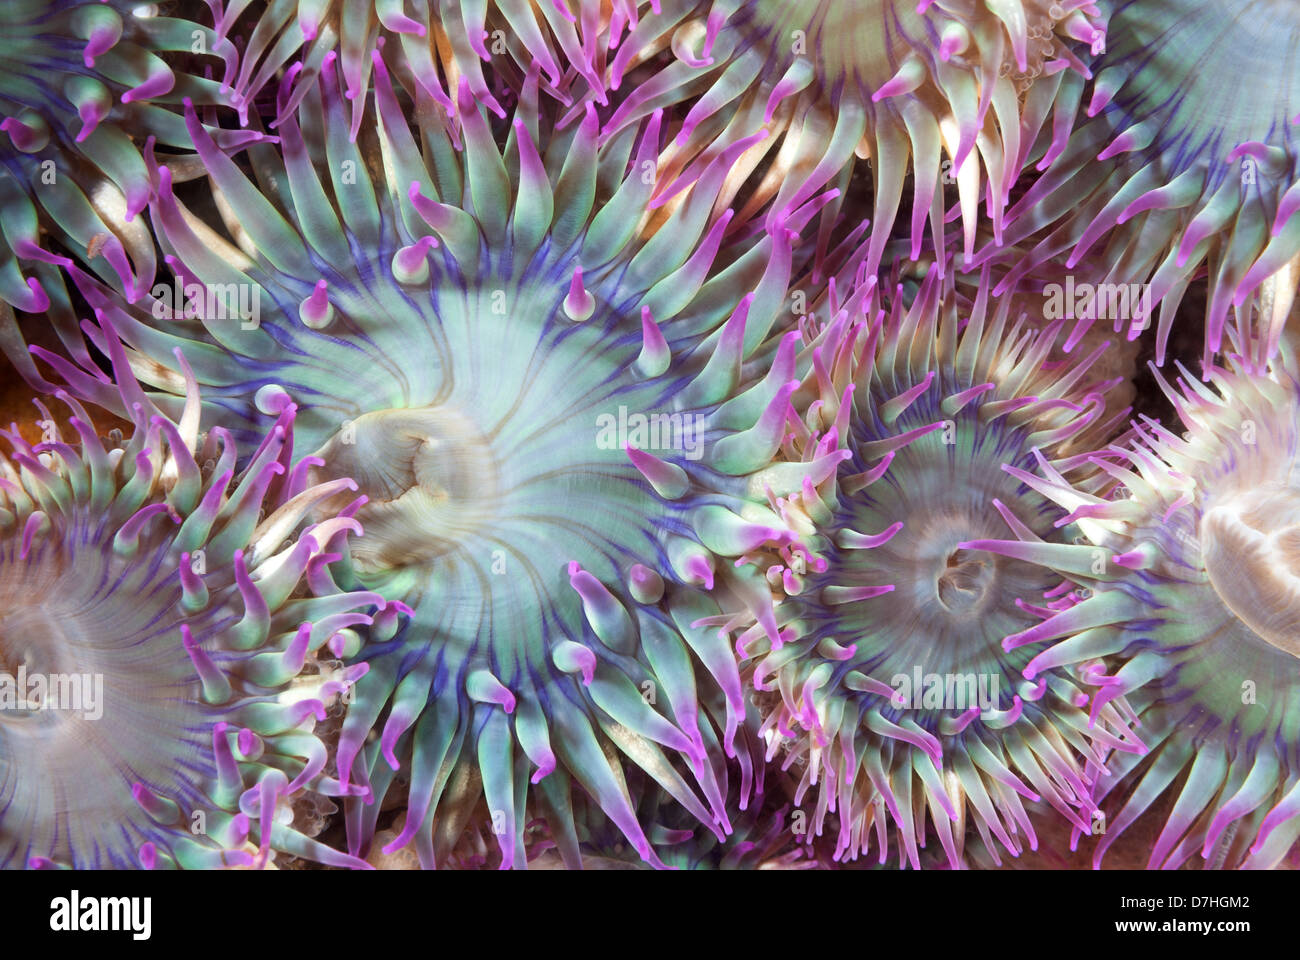 An aggregate of green and purple sea anemones Stock Photo